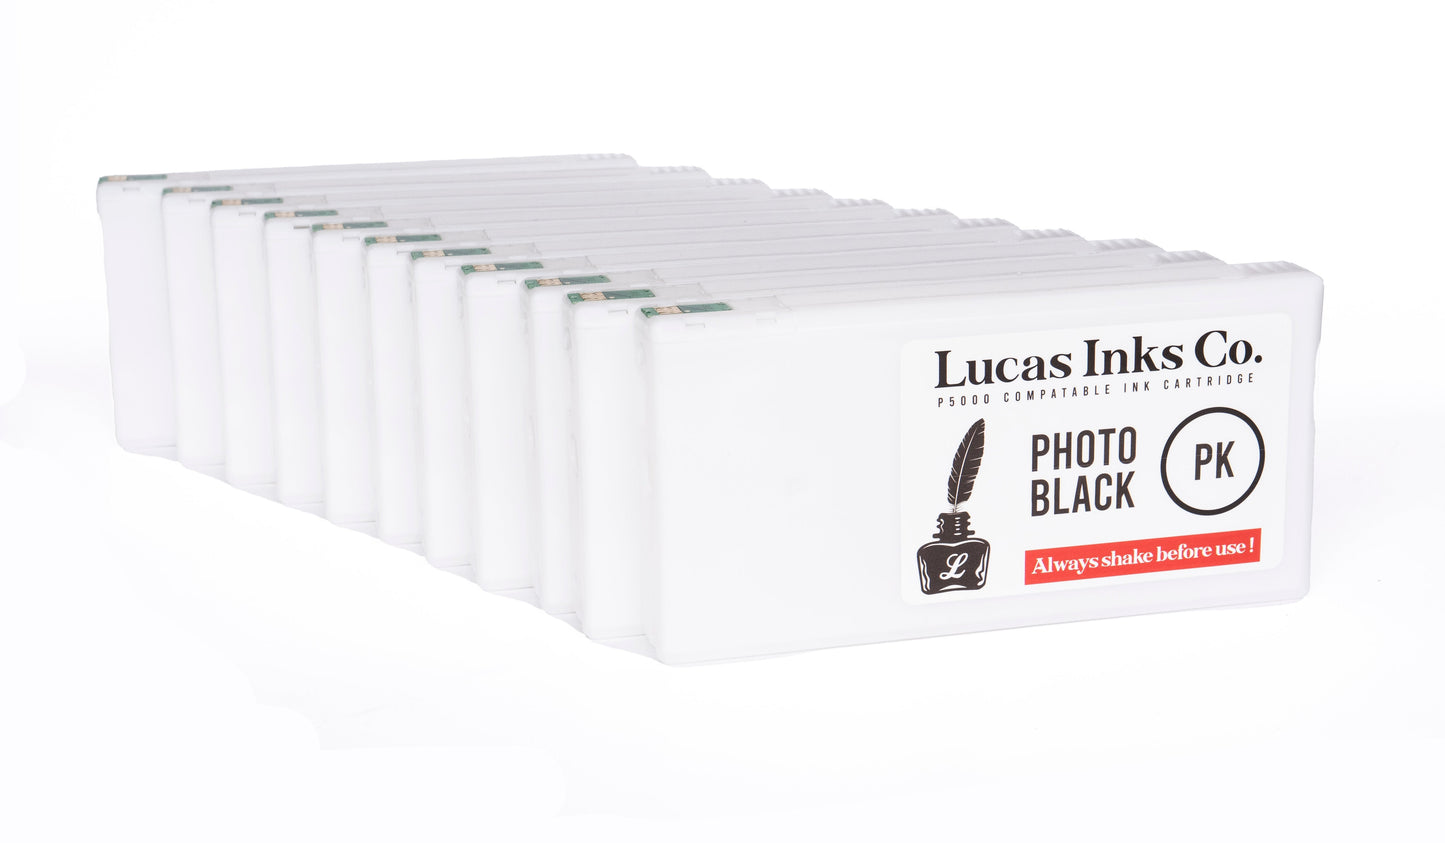 Lucas Inks - Epson 4900 - 220ml Ink Pouch Cartridge System